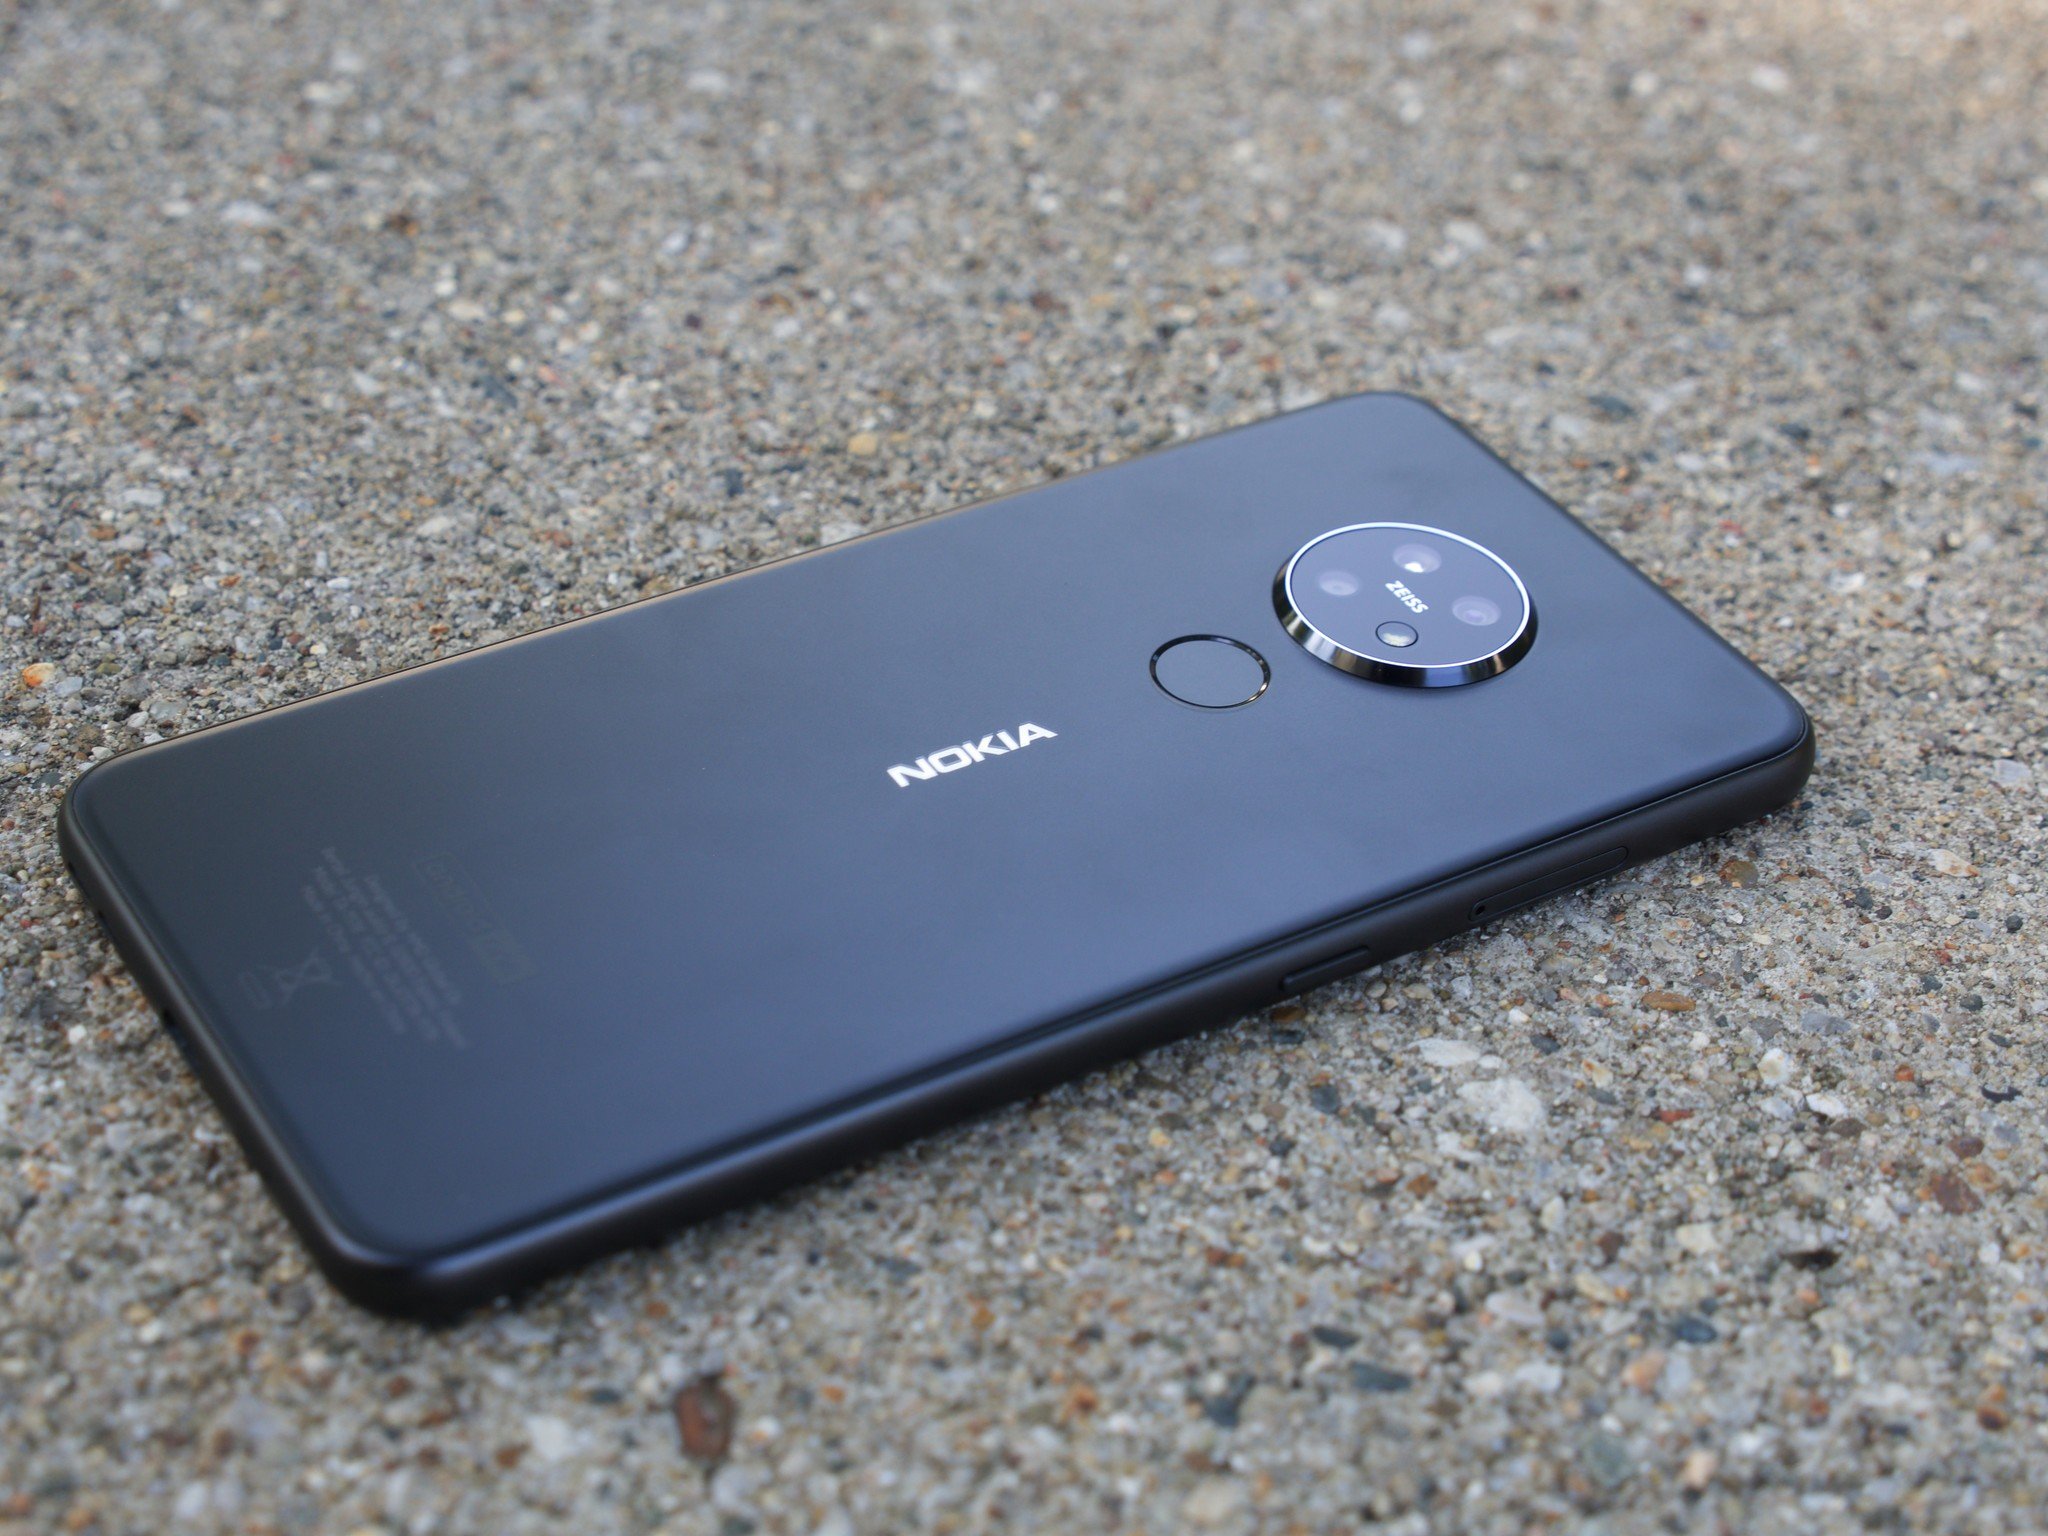 Back of the Nokia 7.2